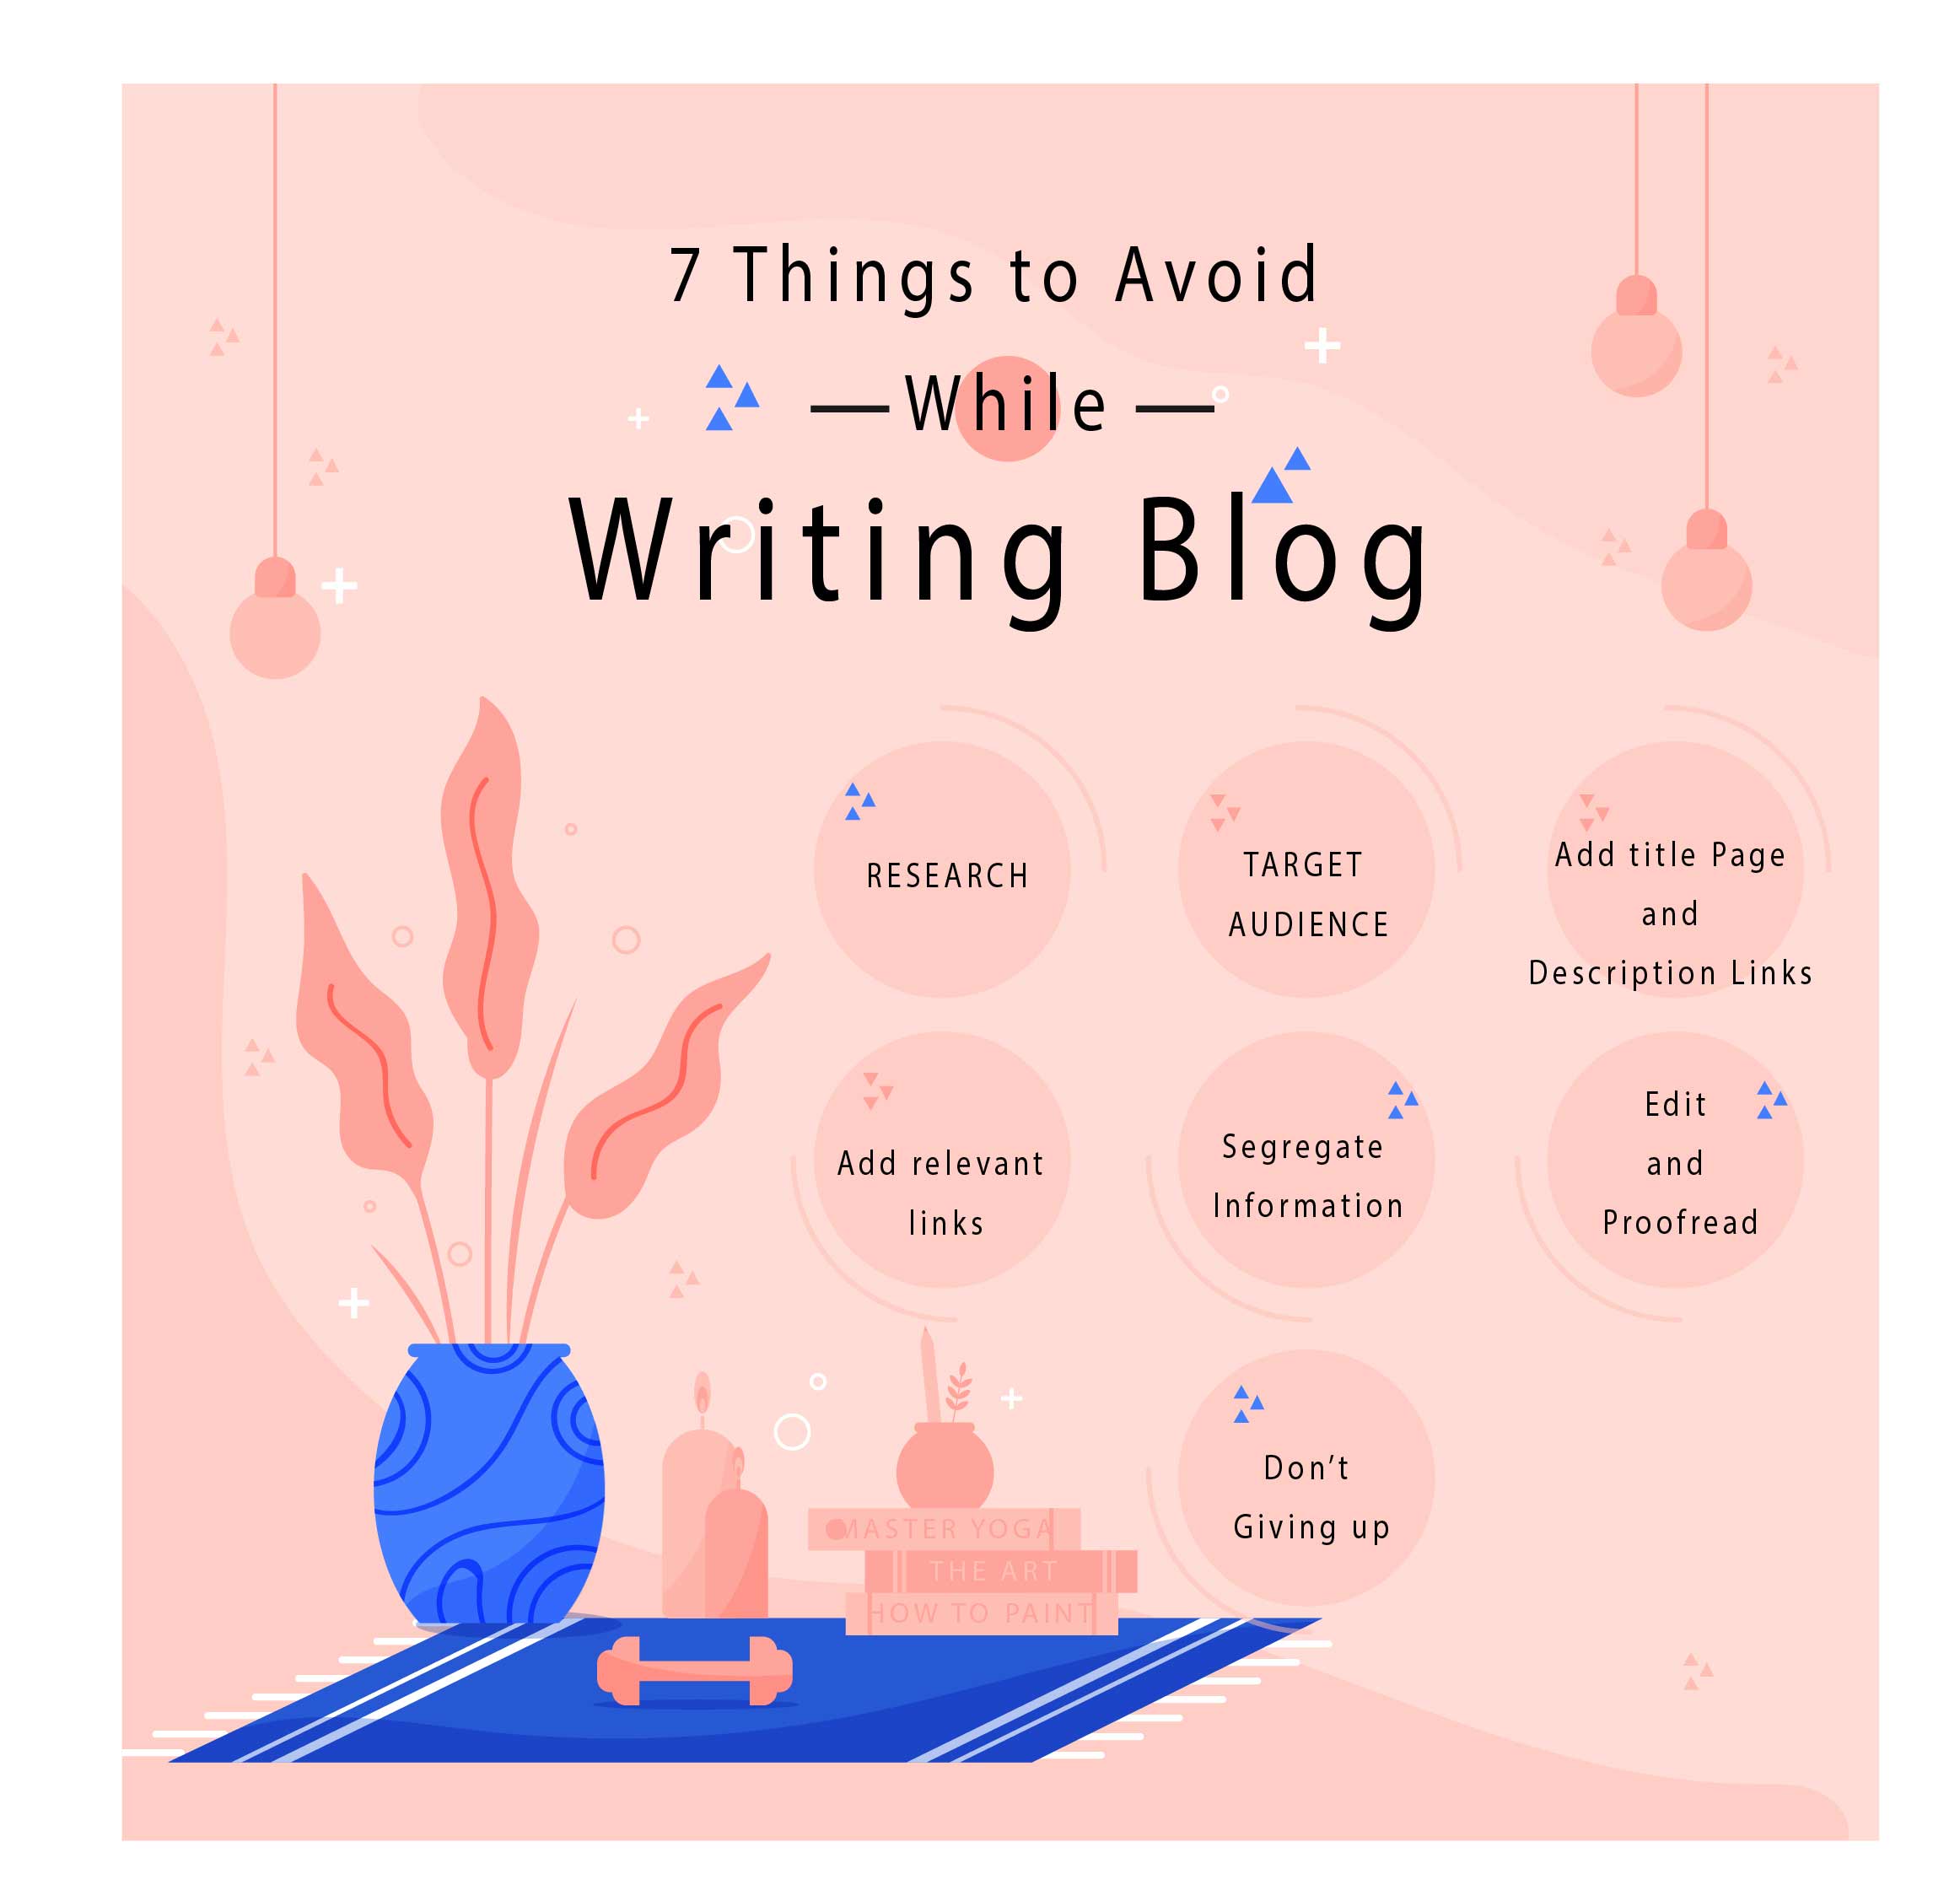 7 things to avoid while writing blog